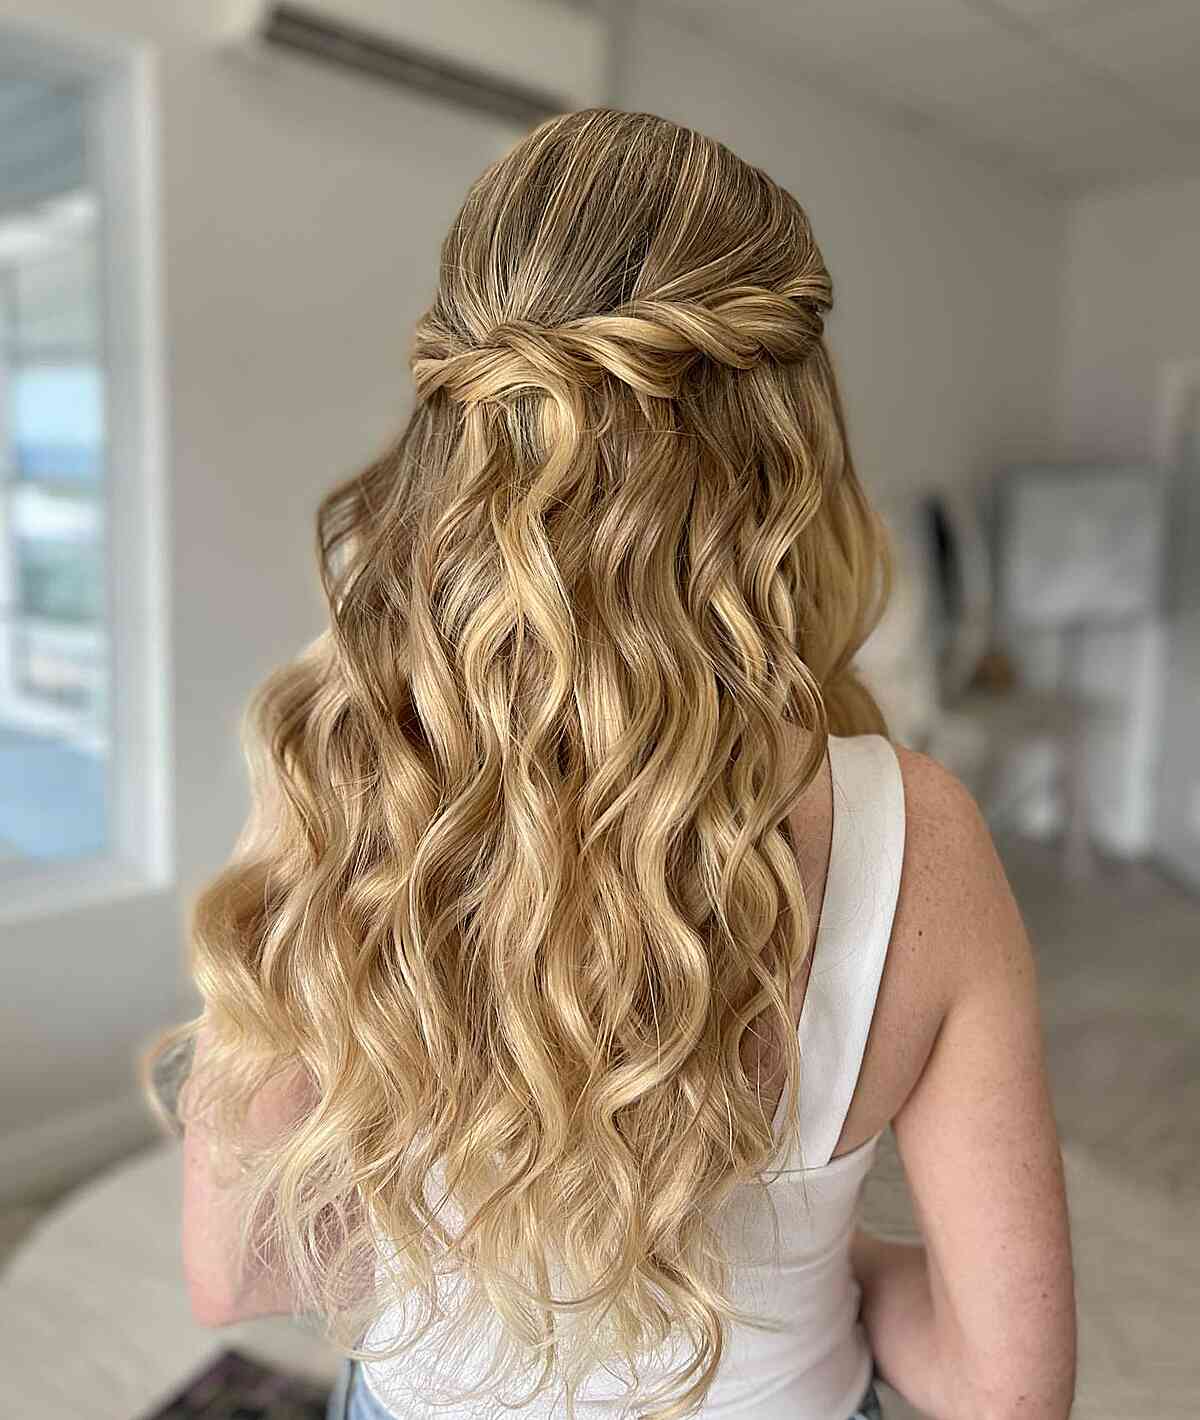 Soft Twisted Half-Down Prom Style with Loose Curls for Long, Blonde Hair